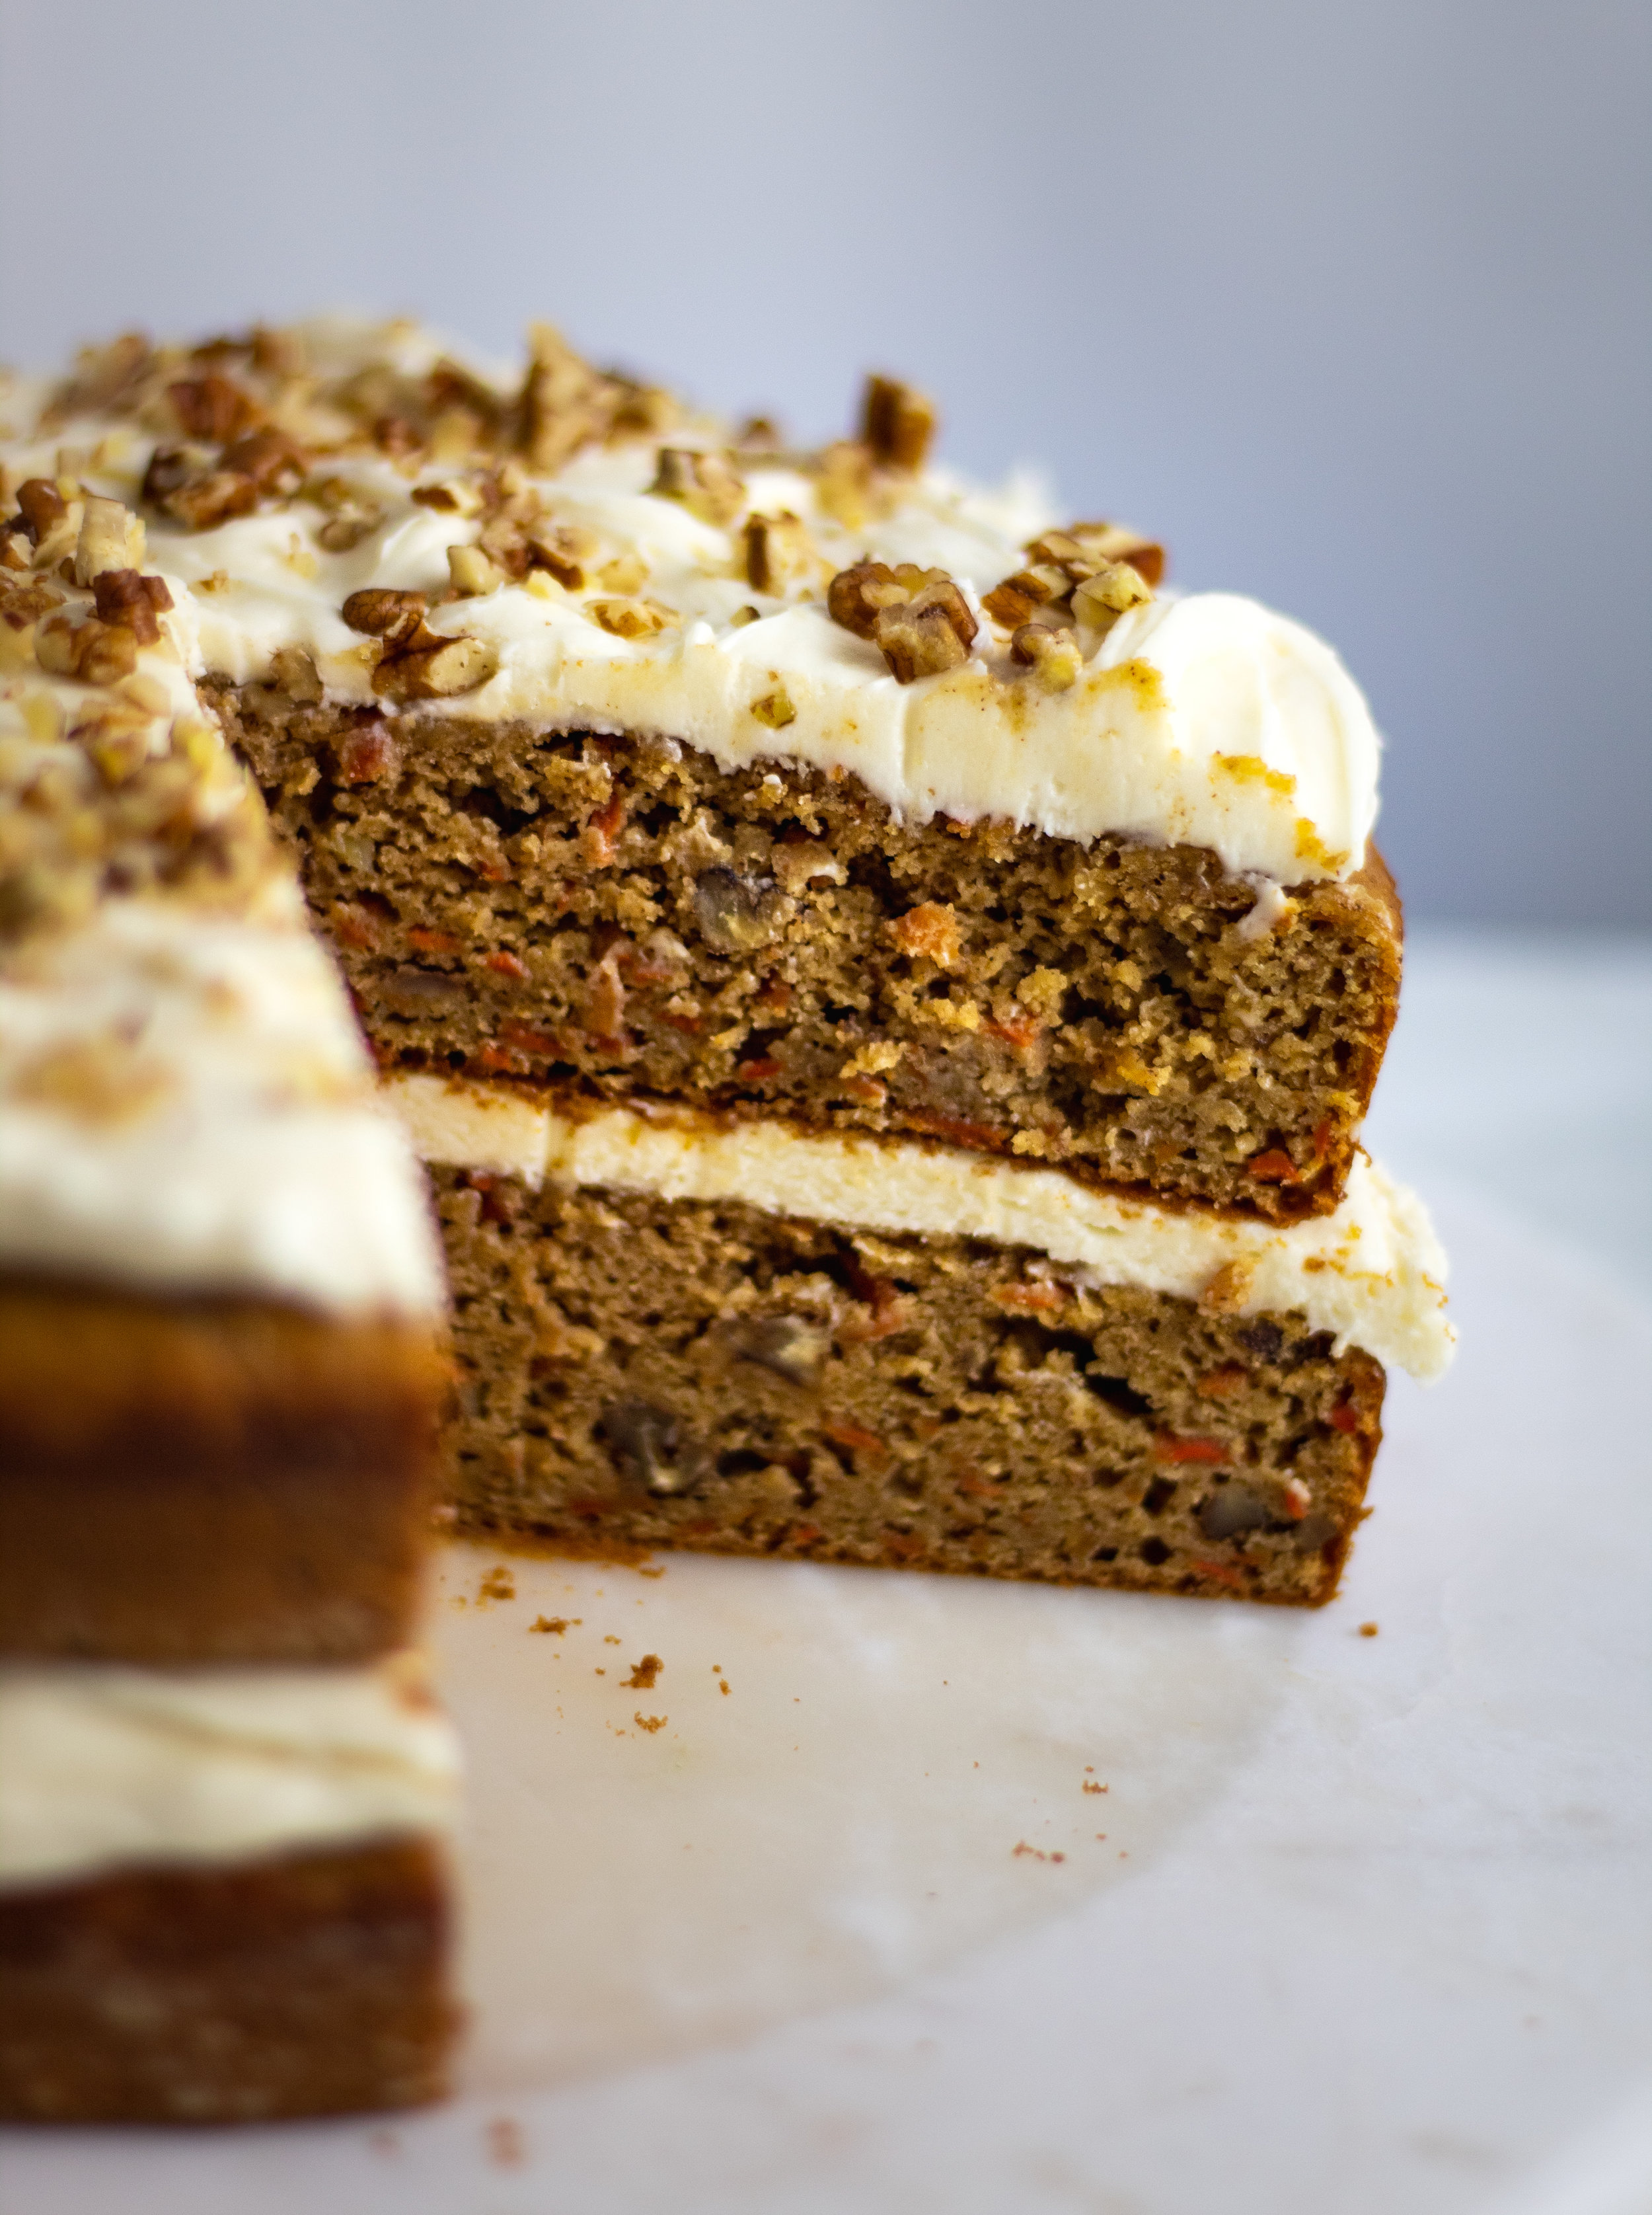 Favorite Carrot Cake Recipe - Cookie and Kate